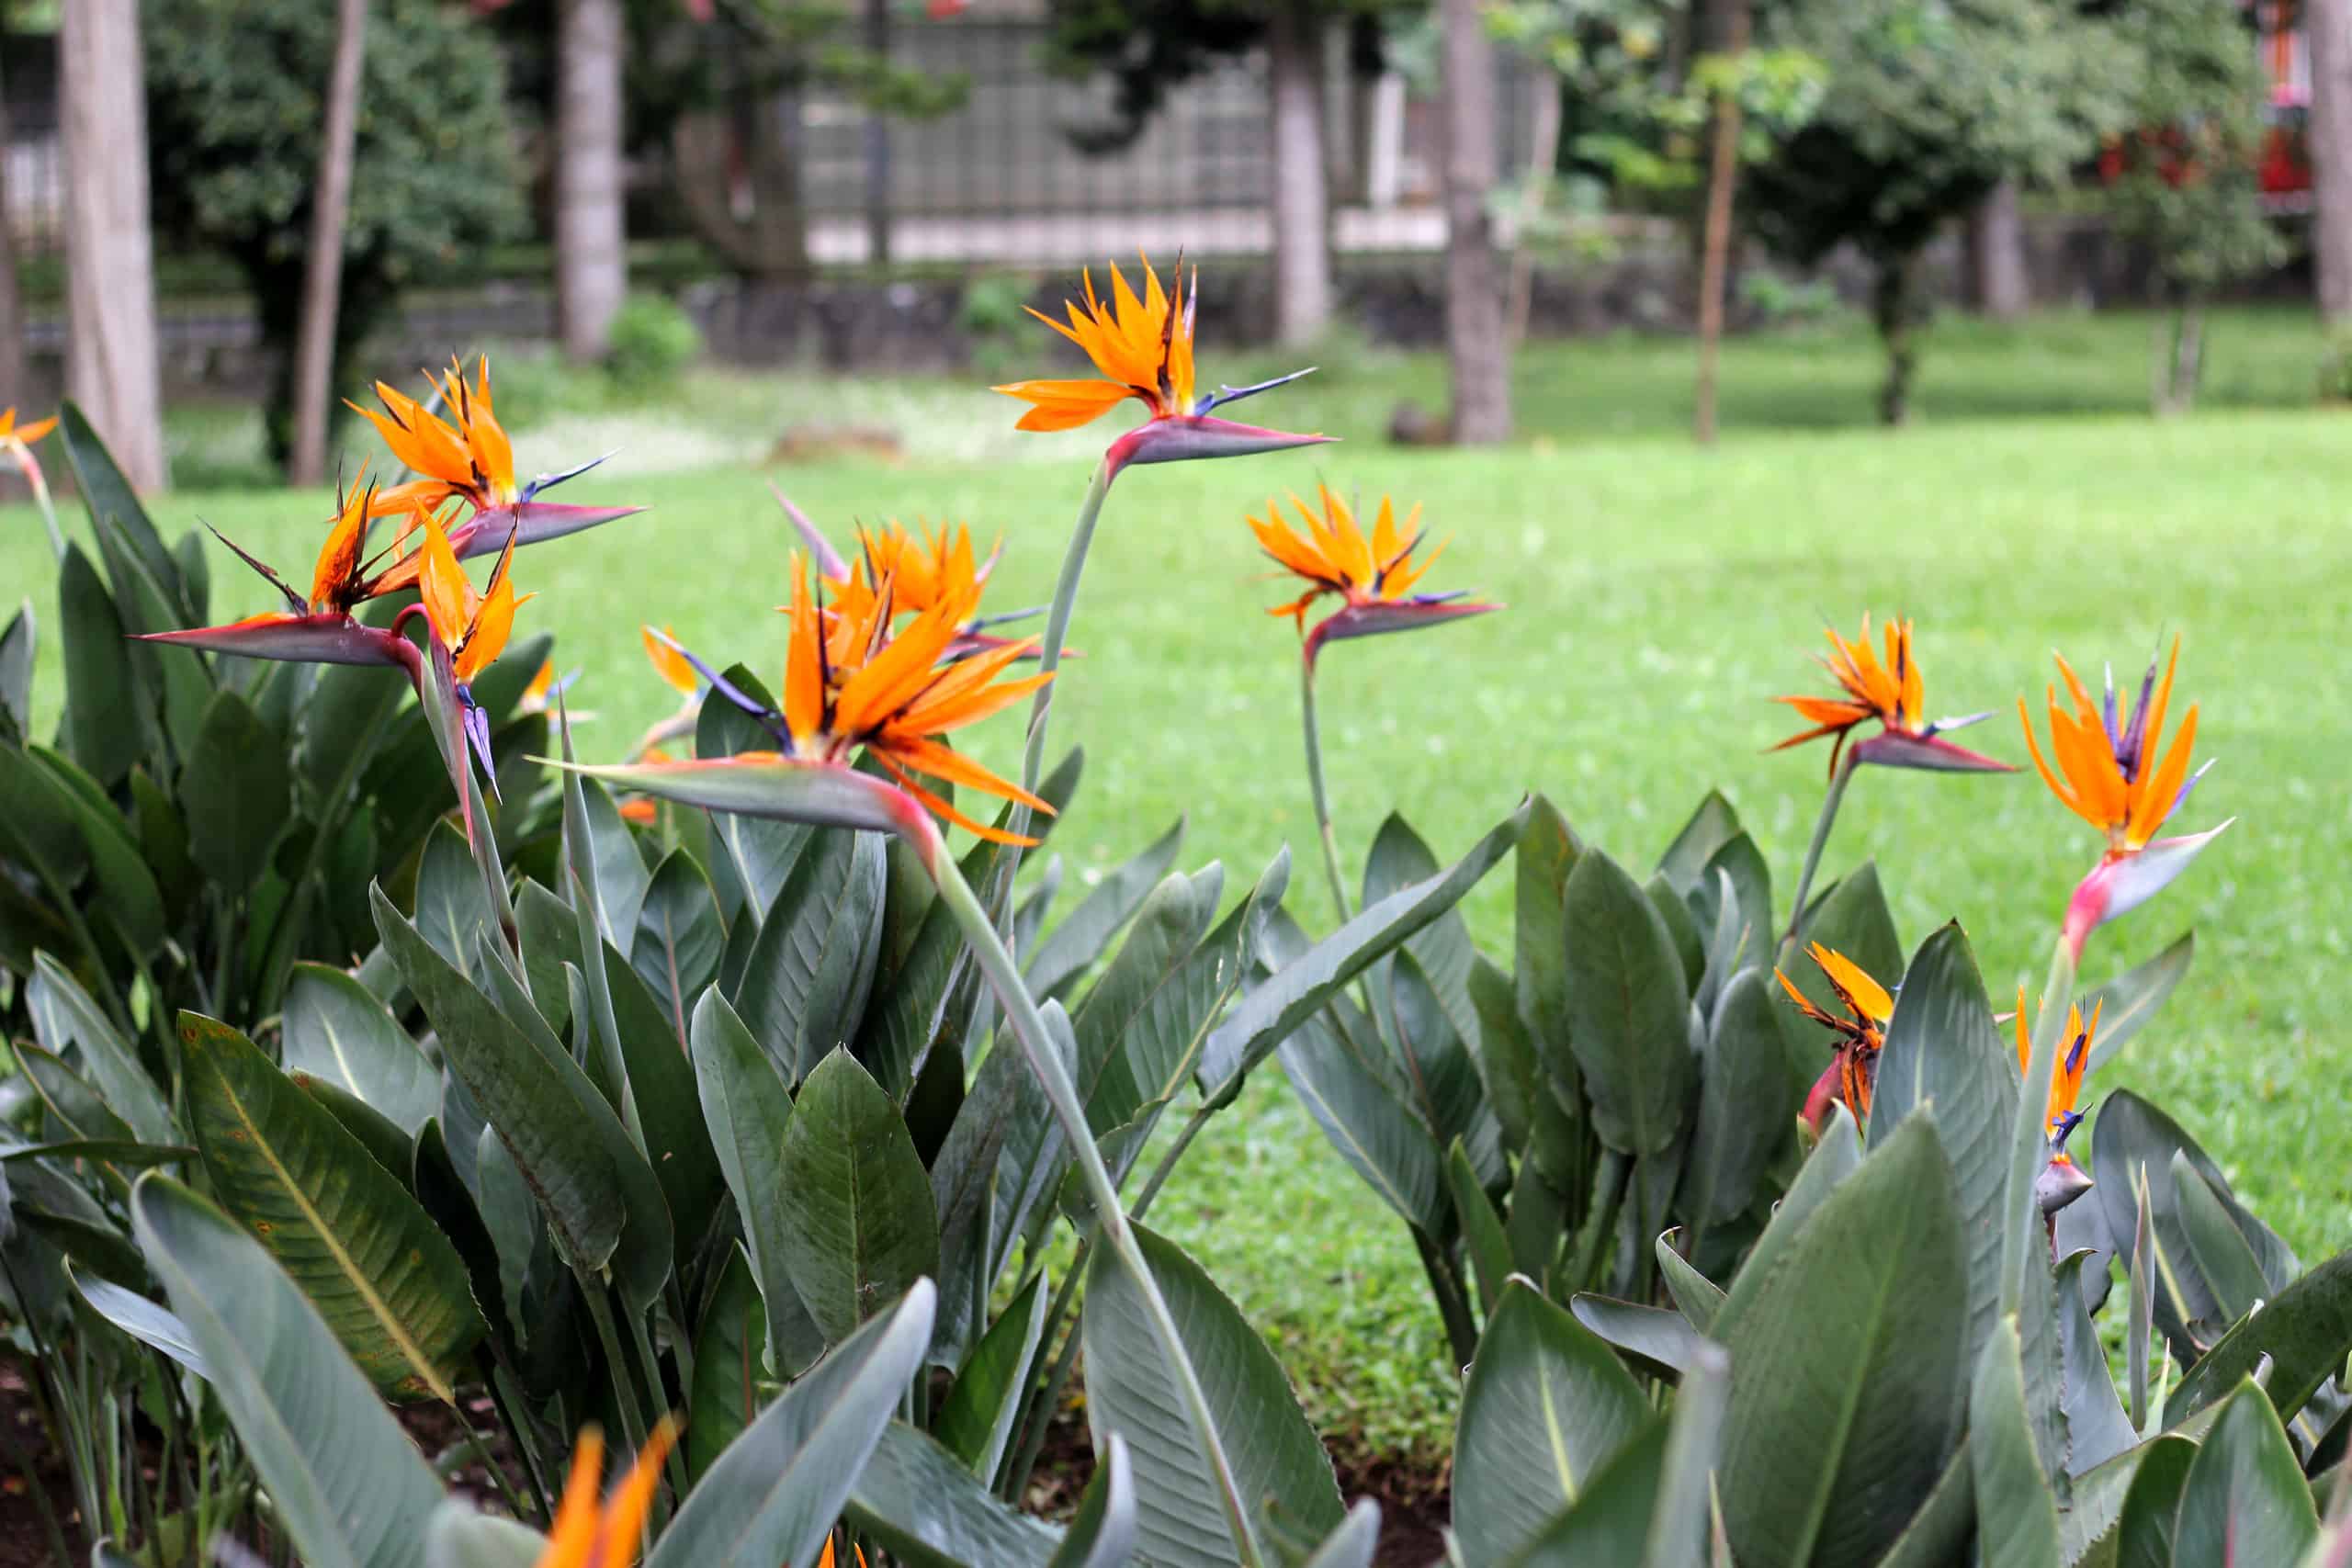 Strelitzia reginae, popularly called bird of paradise, is a herbaceous species native to South Africa. It is cultivated as an ornamental plant due to the peculiar shape of its flower